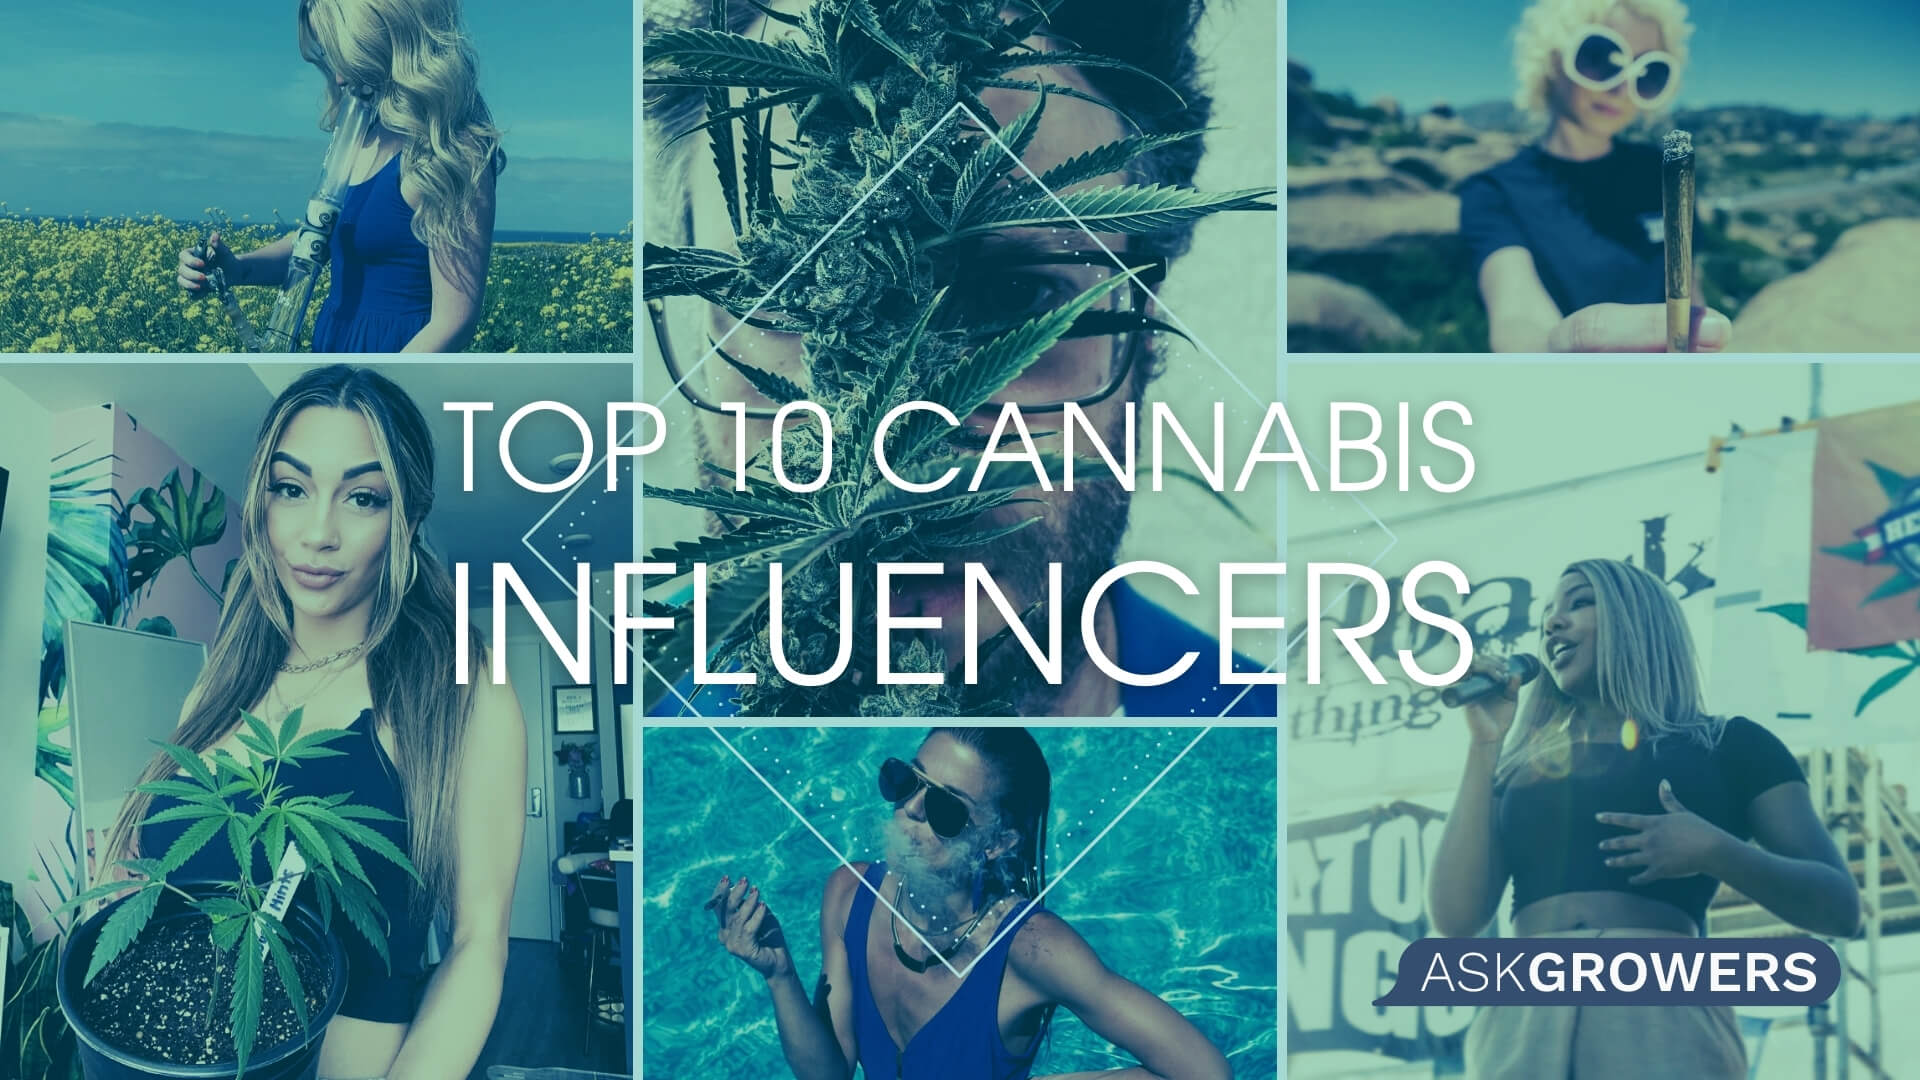 Top 10 Cannabis Influencers